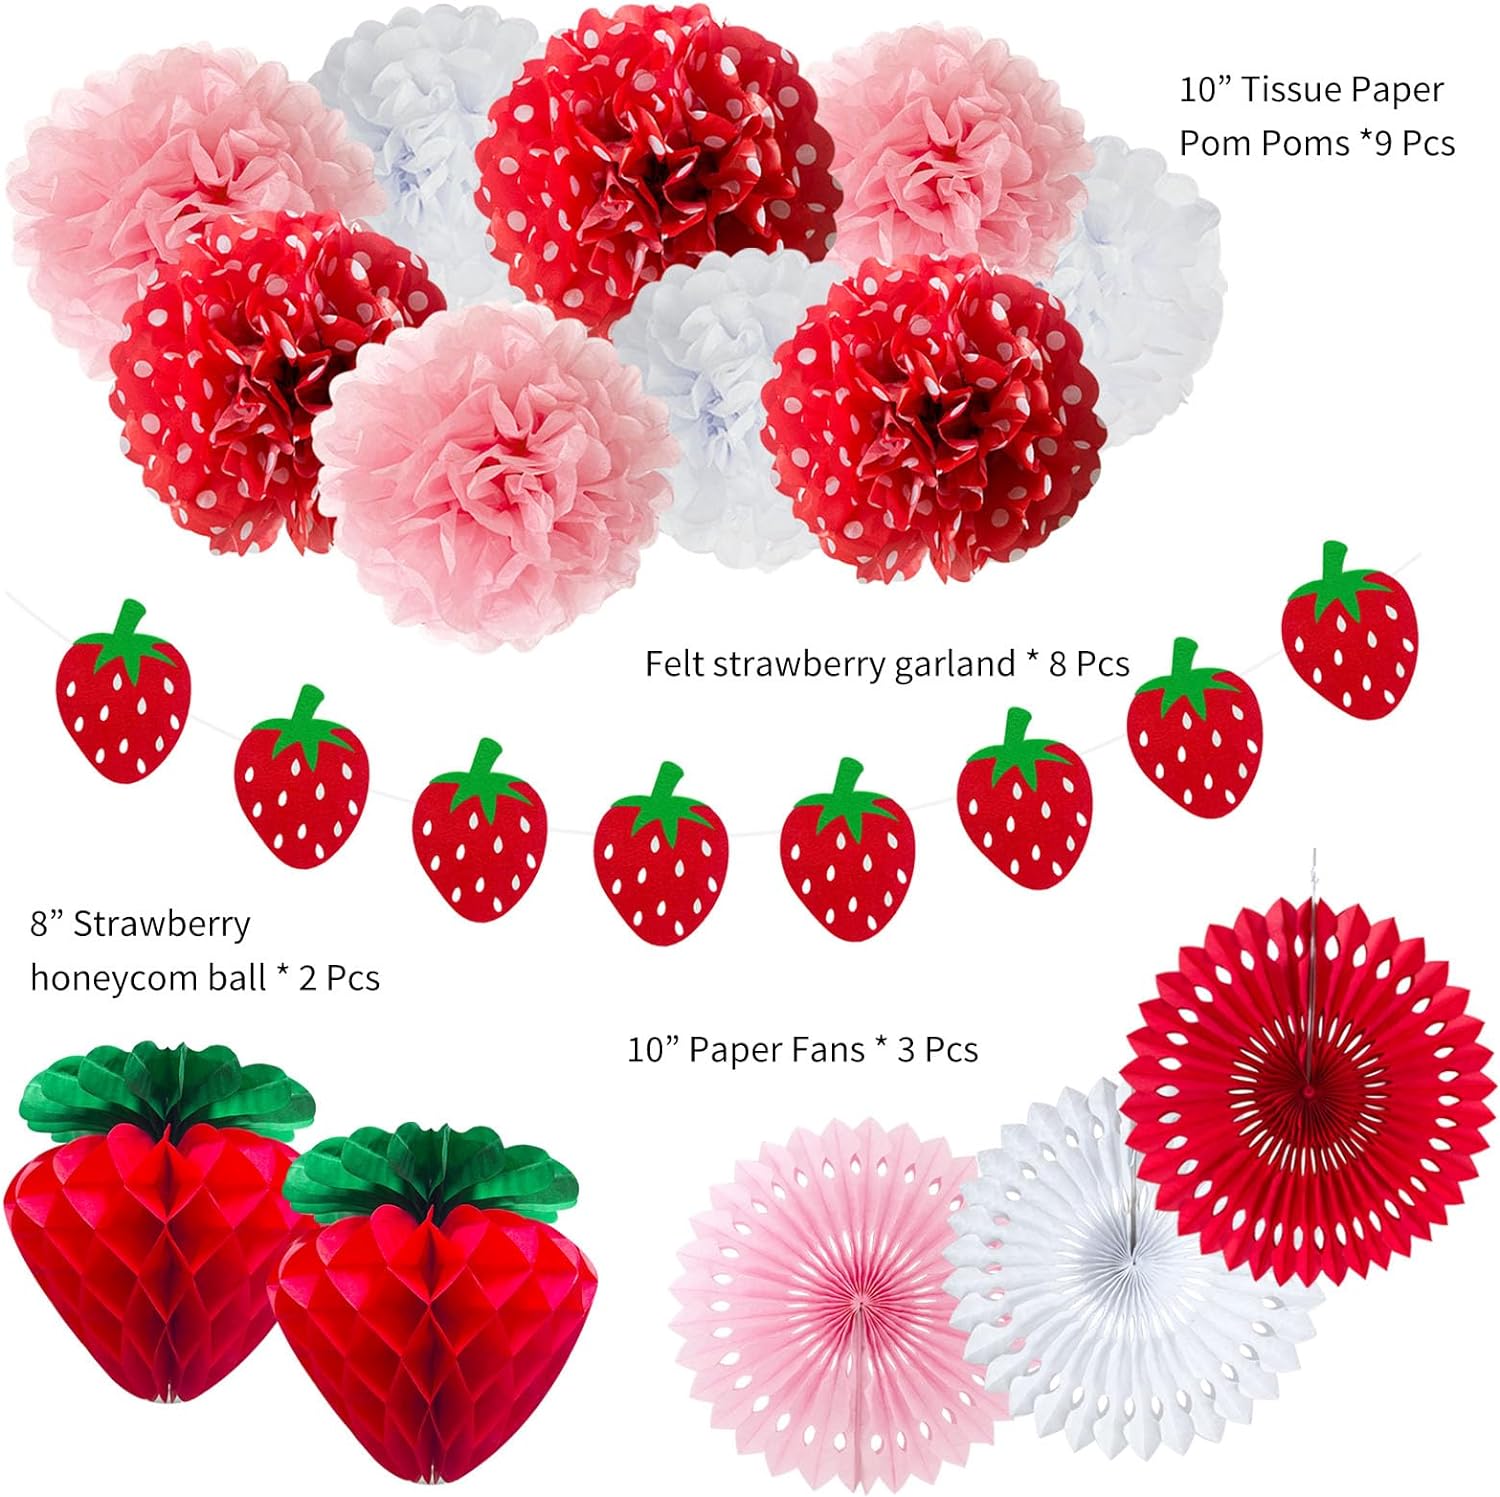 Bulk Strawberry Party Decoration Set Red Pink White Tissue Pom Poms Fans Honeycomb Balls Lanterns Garland Ideal for Classroom Sweet themed Bridal Baby Shower Girls' Party Decor Wholesale